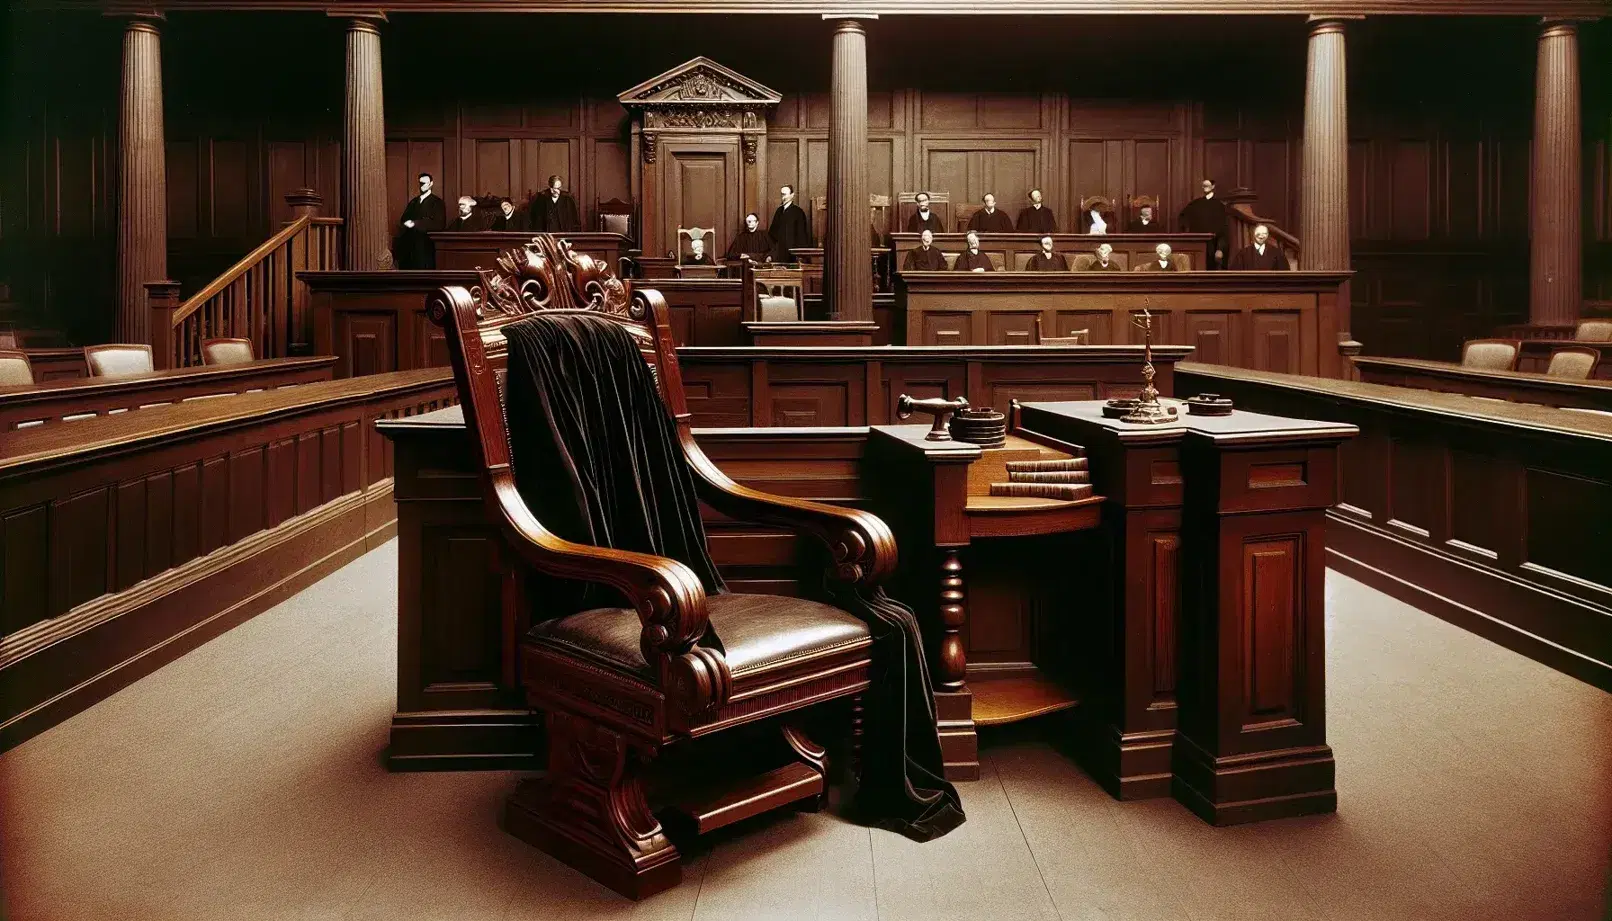 Early 20th-century courtroom with a polished mahogany judge's bench, witness stand, tables with quill pens, and wooden gallery benches.